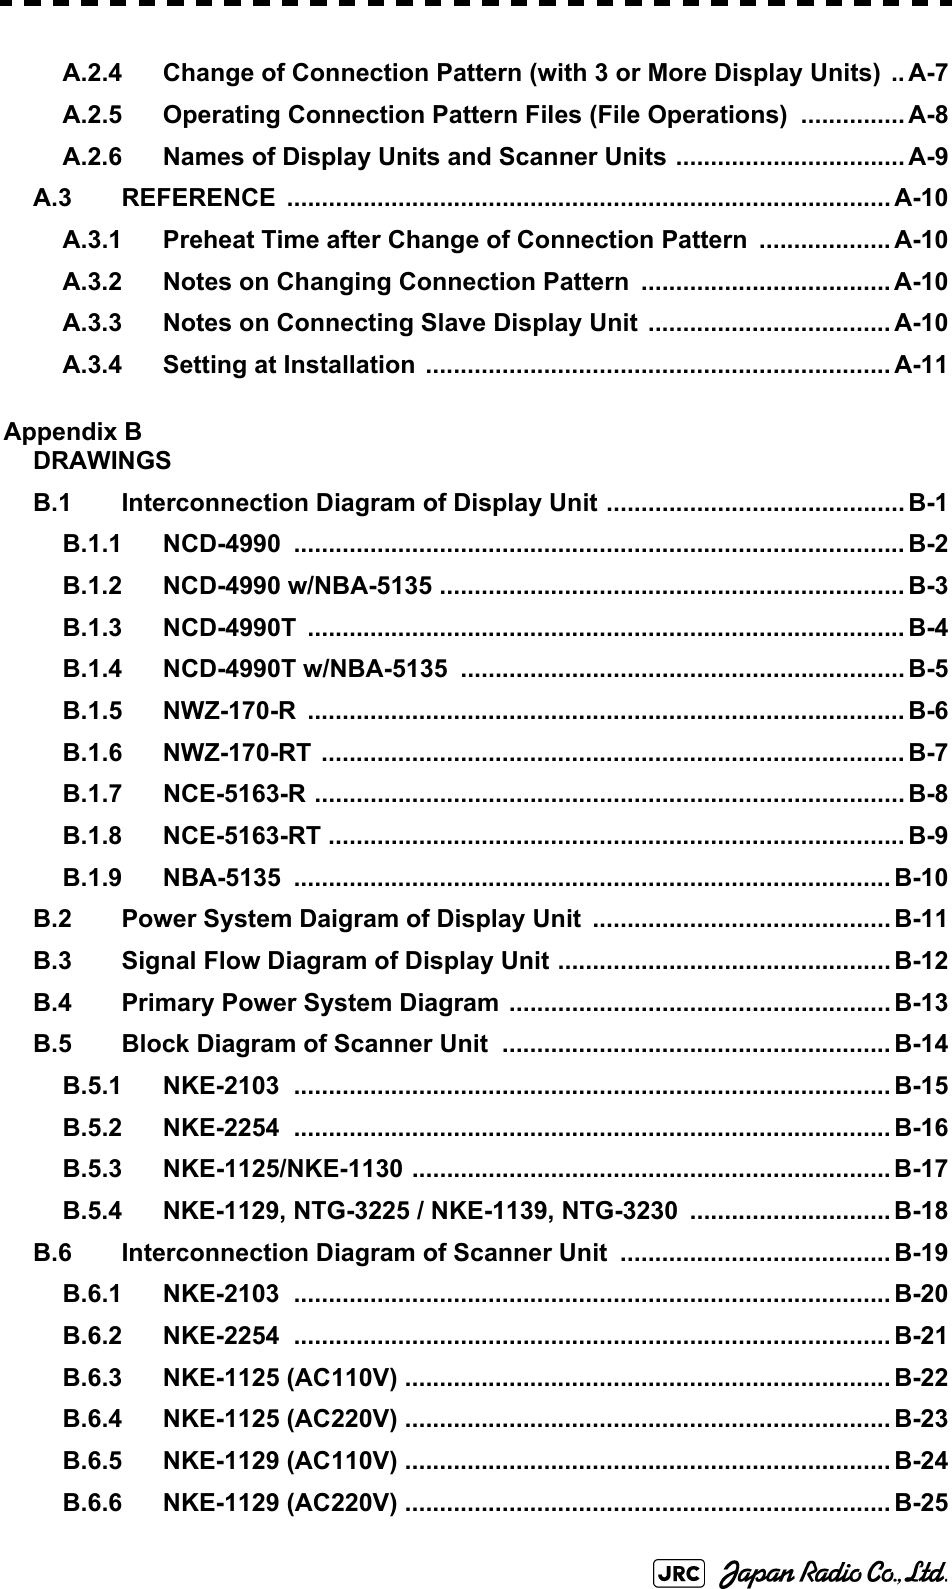 A.2.4 Change of Connection Pattern (with 3 or More Display Units)  .. A-7A.2.5 Operating Connection Pattern Files (File Operations)  ............... A-8A.2.6 Names of Display Units and Scanner Units ................................. A-9A.3 REFERENCE ....................................................................................... A-10A.3.1 Preheat Time after Change of Connection Pattern  ................... A-10A.3.2 Notes on Changing Connection Pattern .................................... A-10A.3.3 Notes on Connecting Slave Display Unit  ................................... A-10A.3.4 Setting at Installation  ................................................................... A-11Appendix BDRAWINGSB.1 Interconnection Diagram of Display Unit ........................................... B-1B.1.1 NCD-4990 ........................................................................................ B-2B.1.2 NCD-4990 w/NBA-5135 ................................................................... B-3B.1.3 NCD-4990T ...................................................................................... B-4B.1.4 NCD-4990T w/NBA-5135  ................................................................ B-5B.1.5 NWZ-170-R ...................................................................................... B-6B.1.6 NWZ-170-RT .................................................................................... B-7B.1.7 NCE-5163-R ..................................................................................... B-8B.1.8 NCE-5163-RT ................................................................................... B-9B.1.9 NBA-5135 ...................................................................................... B-10B.2 Power System Daigram of Display Unit  ........................................... B-11B.3 Signal Flow Diagram of Display Unit ................................................ B-12B.4 Primary Power System Diagram ....................................................... B-13B.5 Block Diagram of Scanner Unit ........................................................ B-14B.5.1 NKE-2103 ...................................................................................... B-15B.5.2 NKE-2254 ...................................................................................... B-16B.5.3 NKE-1125/NKE-1130 ..................................................................... B-17B.5.4 NKE-1129, NTG-3225 / NKE-1139, NTG-3230  ............................. B-18B.6 Interconnection Diagram of Scanner Unit  ....................................... B-19B.6.1 NKE-2103 ...................................................................................... B-20B.6.2 NKE-2254 ...................................................................................... B-21B.6.3 NKE-1125 (AC110V) ...................................................................... B-22B.6.4 NKE-1125 (AC220V) ...................................................................... B-23B.6.5 NKE-1129 (AC110V) ...................................................................... B-24B.6.6 NKE-1129 (AC220V) ...................................................................... B-25